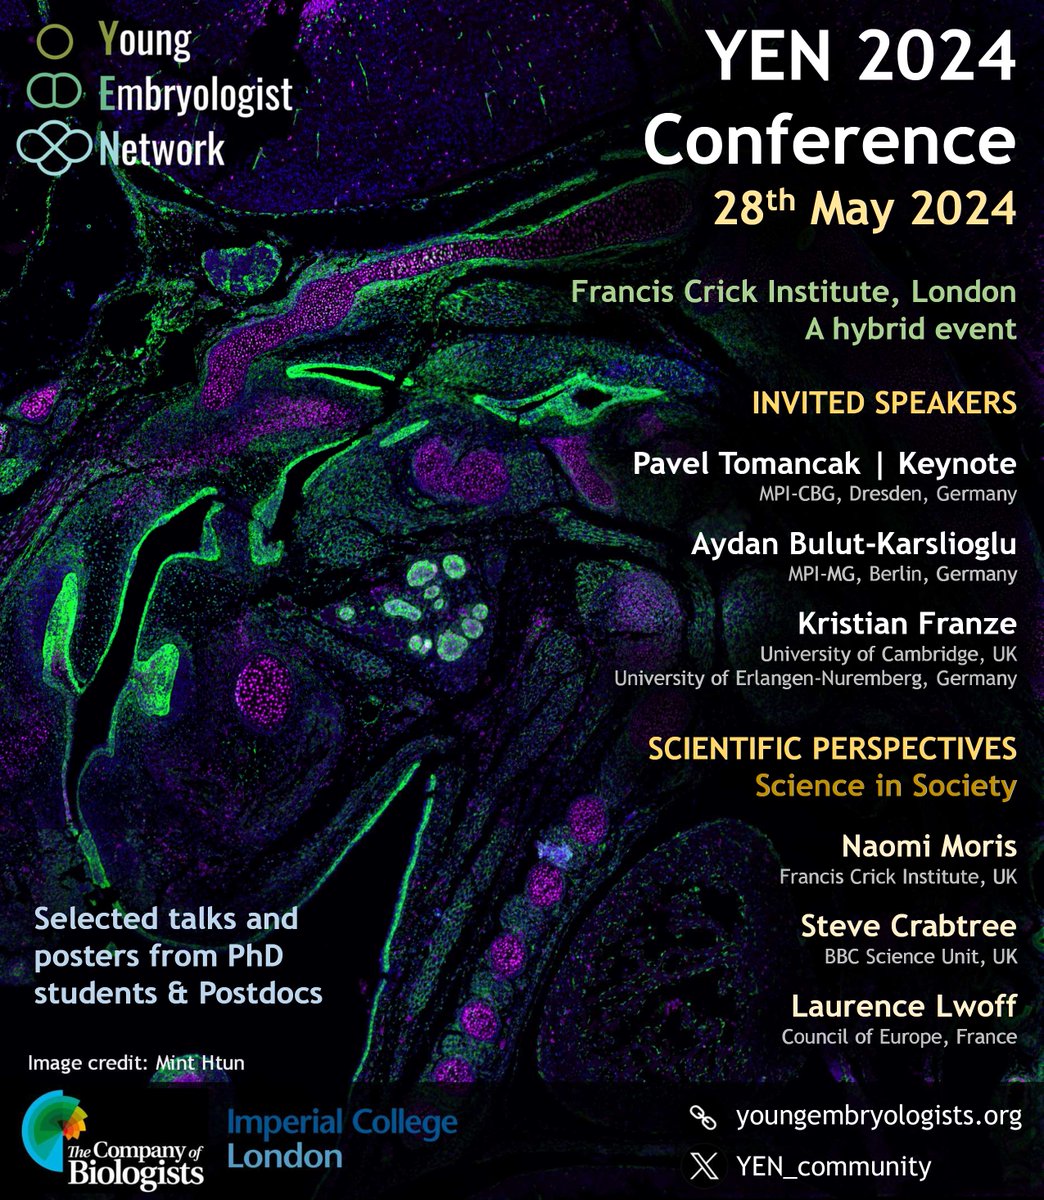 Registration is open for #YEN2024! Join us on May 28th @TheCrick and online around the world 🌎Registration is free! Send in your abstracts for a chance to present your work in a talk or poster. Travel grants are available thanks to @Co_Biologists!🙌 tinyurl.com/YENMeeting24